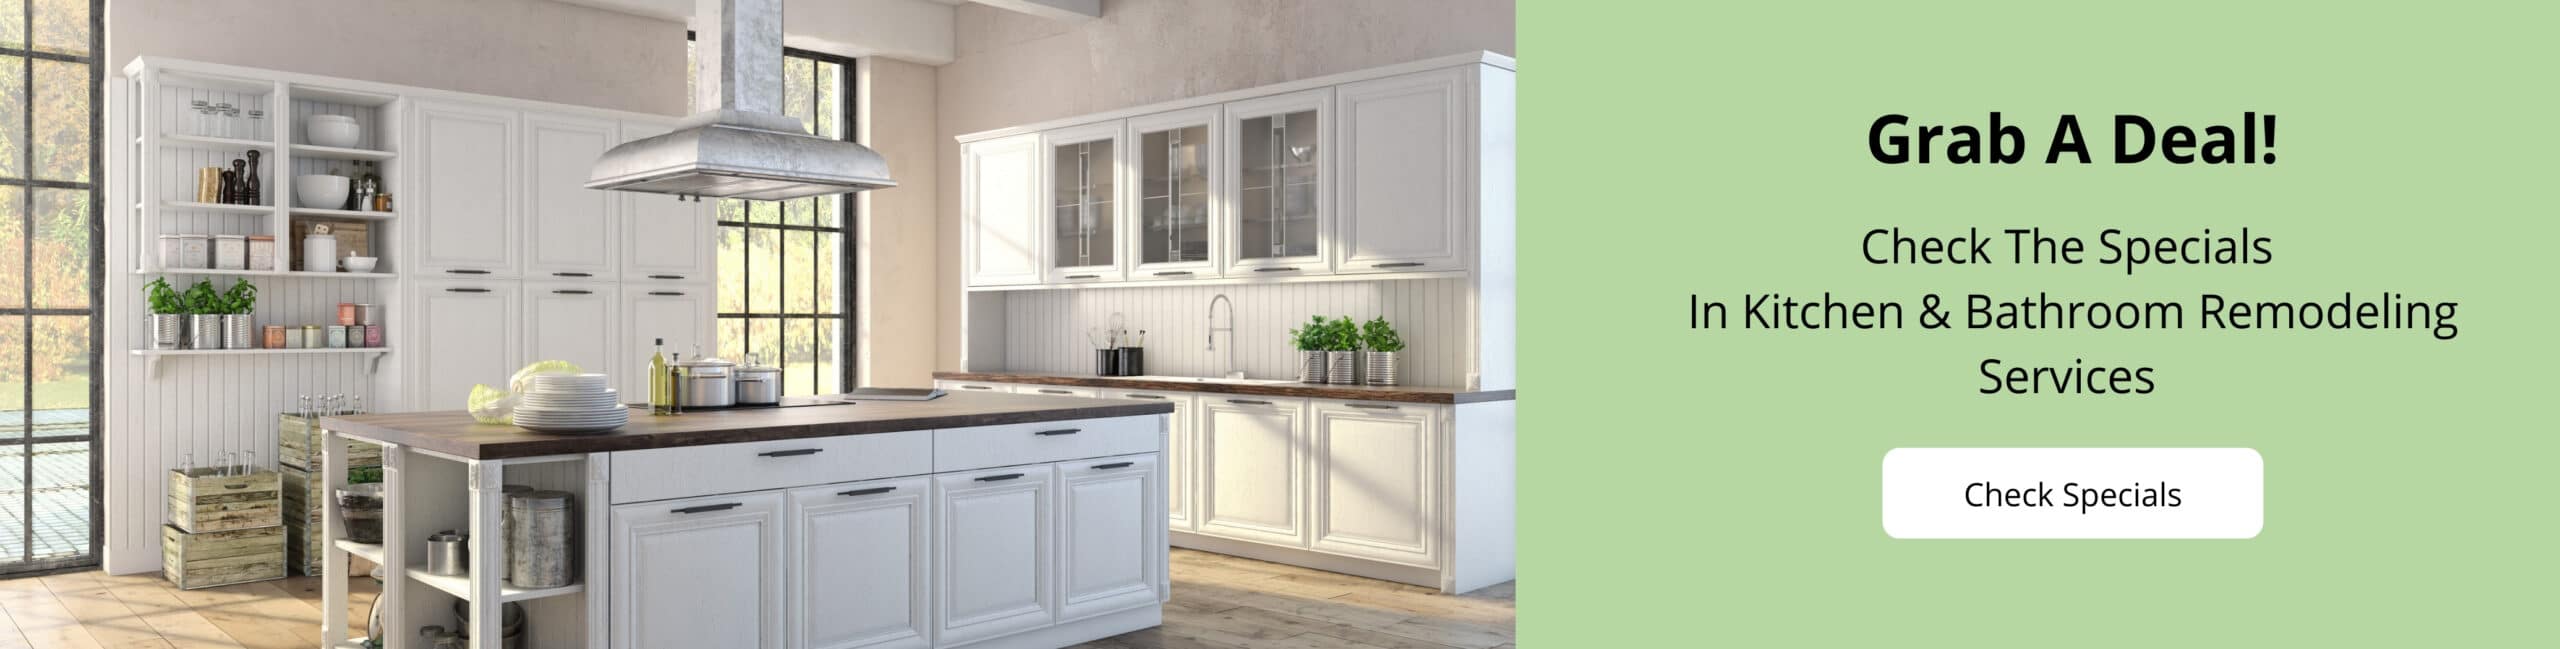 Kitchen remodeling contractors near me